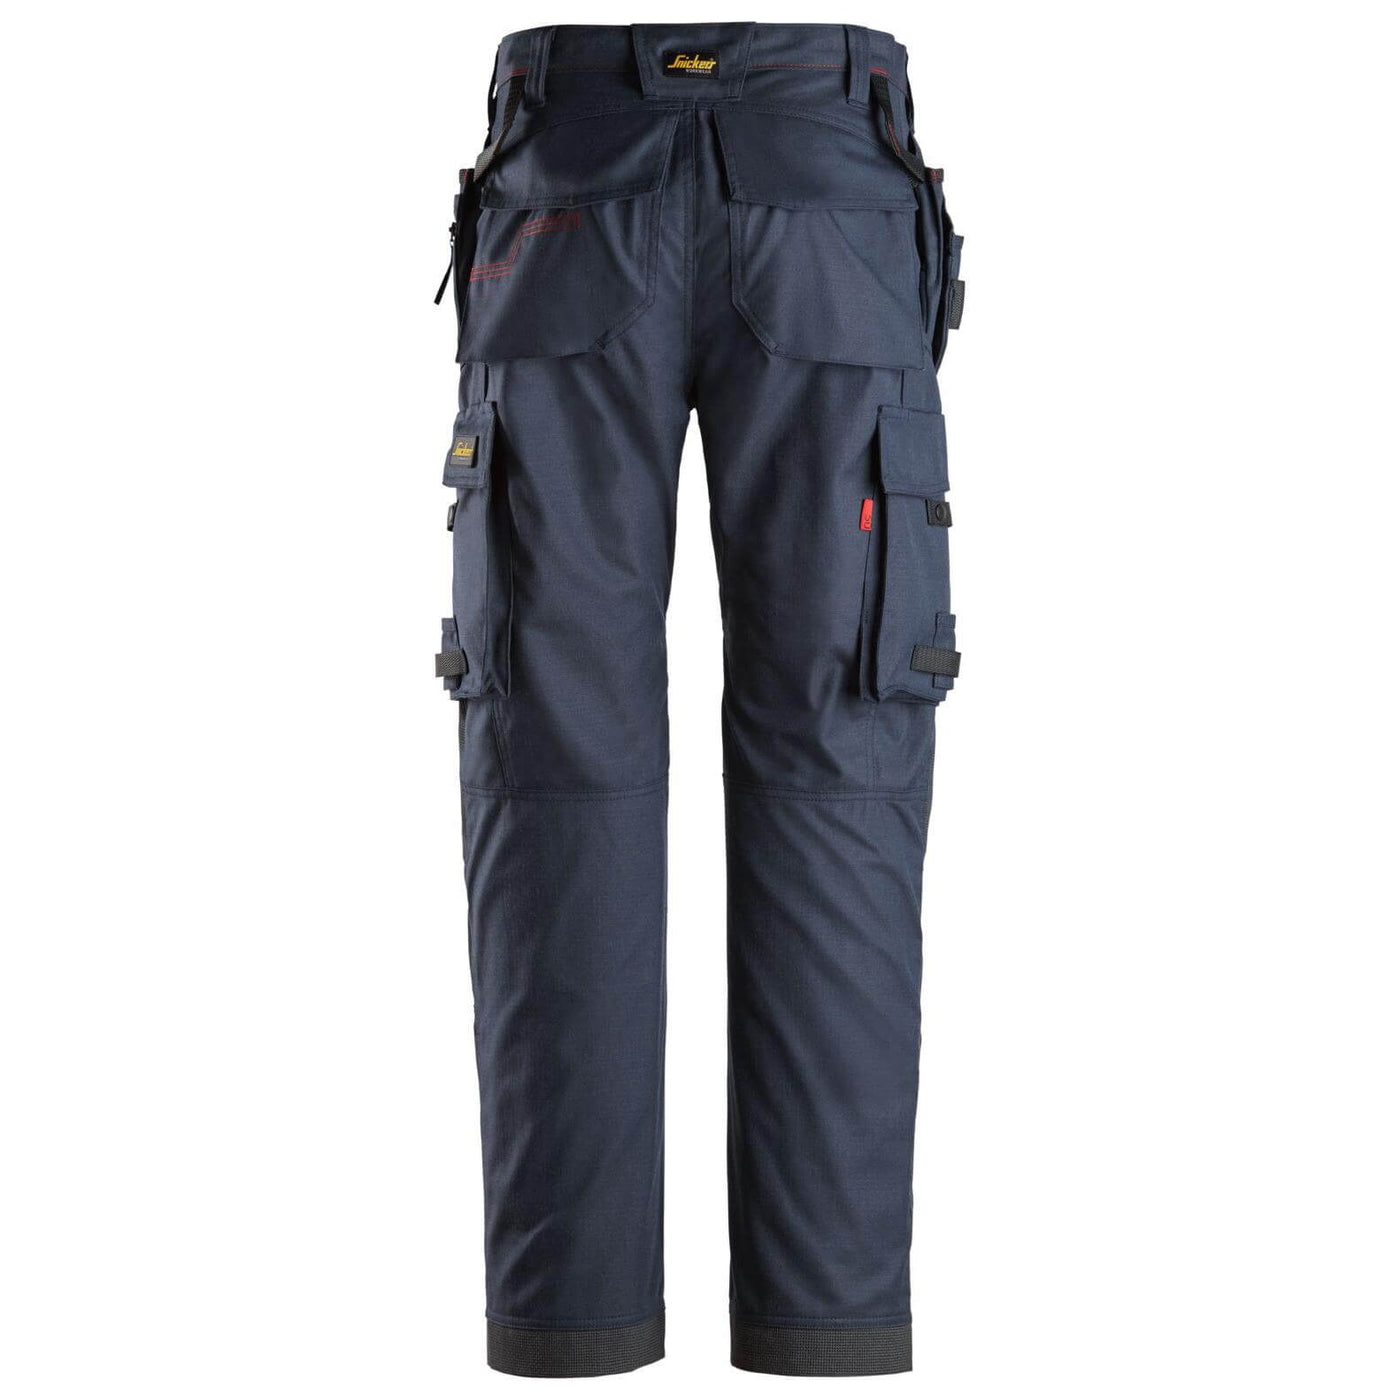 Snickers 6262 ProtecWork Work Trousers with Holster Pockets and Equal Leg Pockets Navy back3823286 #colour_navy